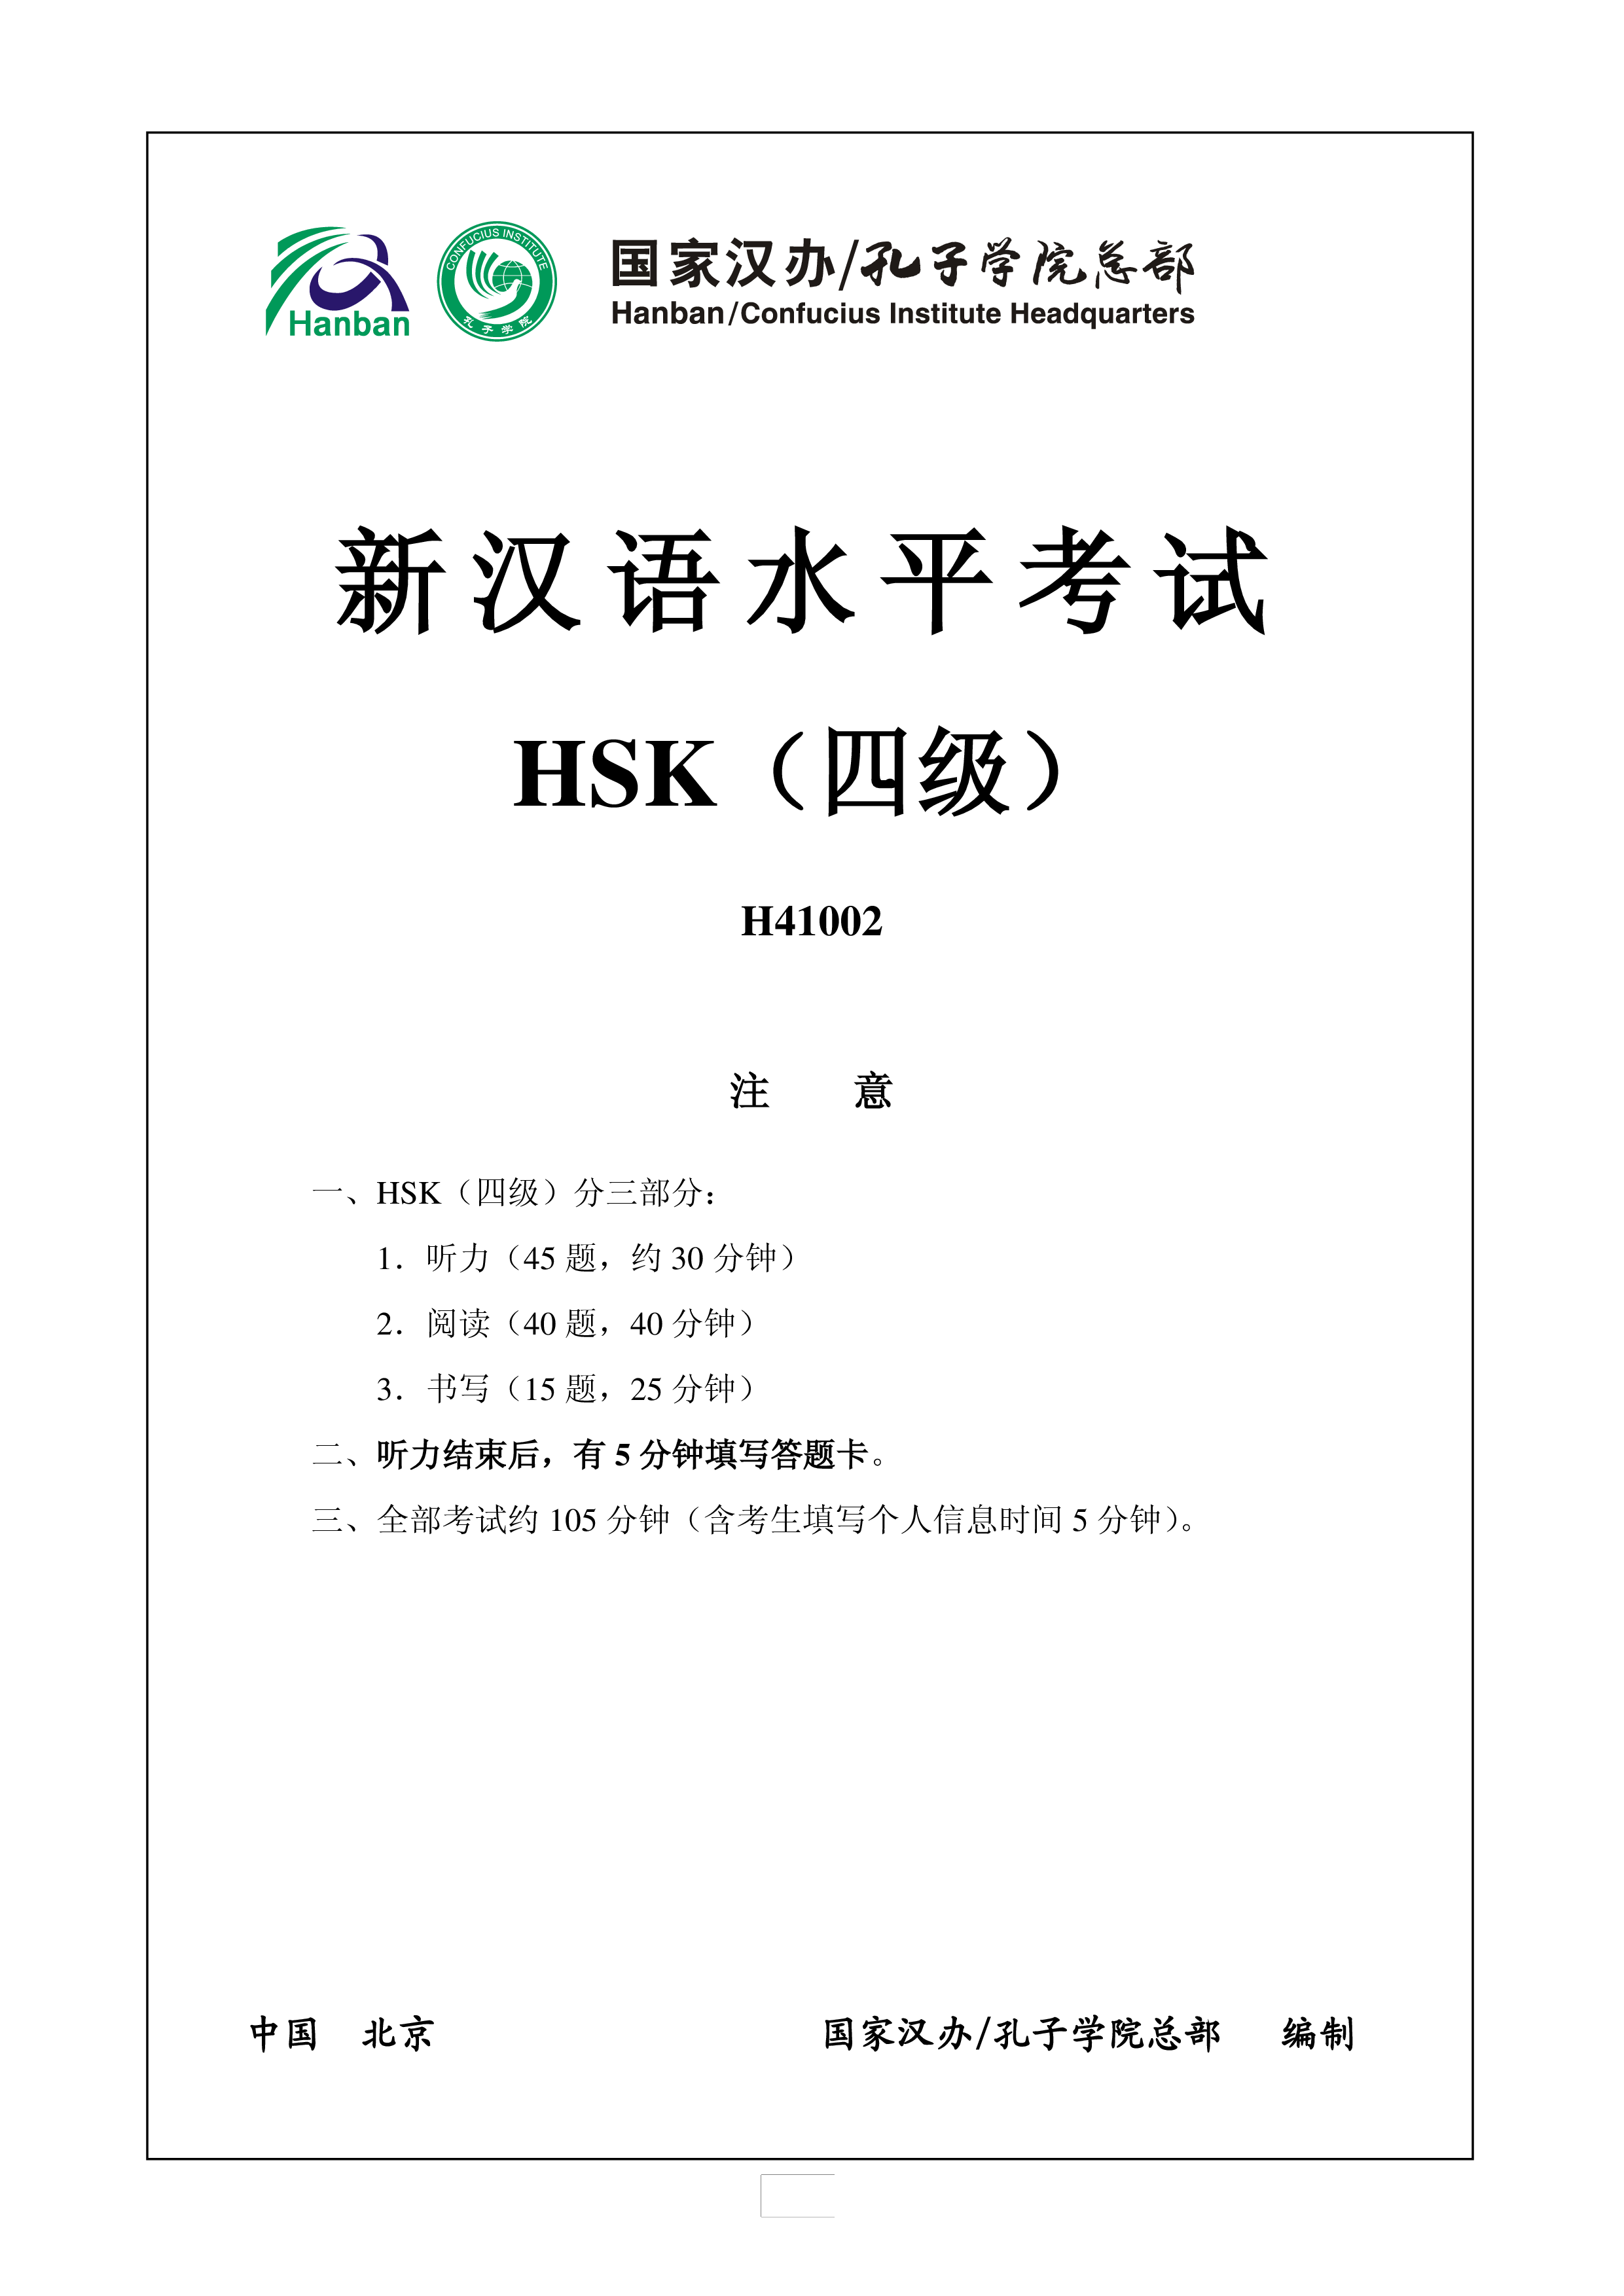 hsk4 chinese exam including answers # hsk h41002 modèles